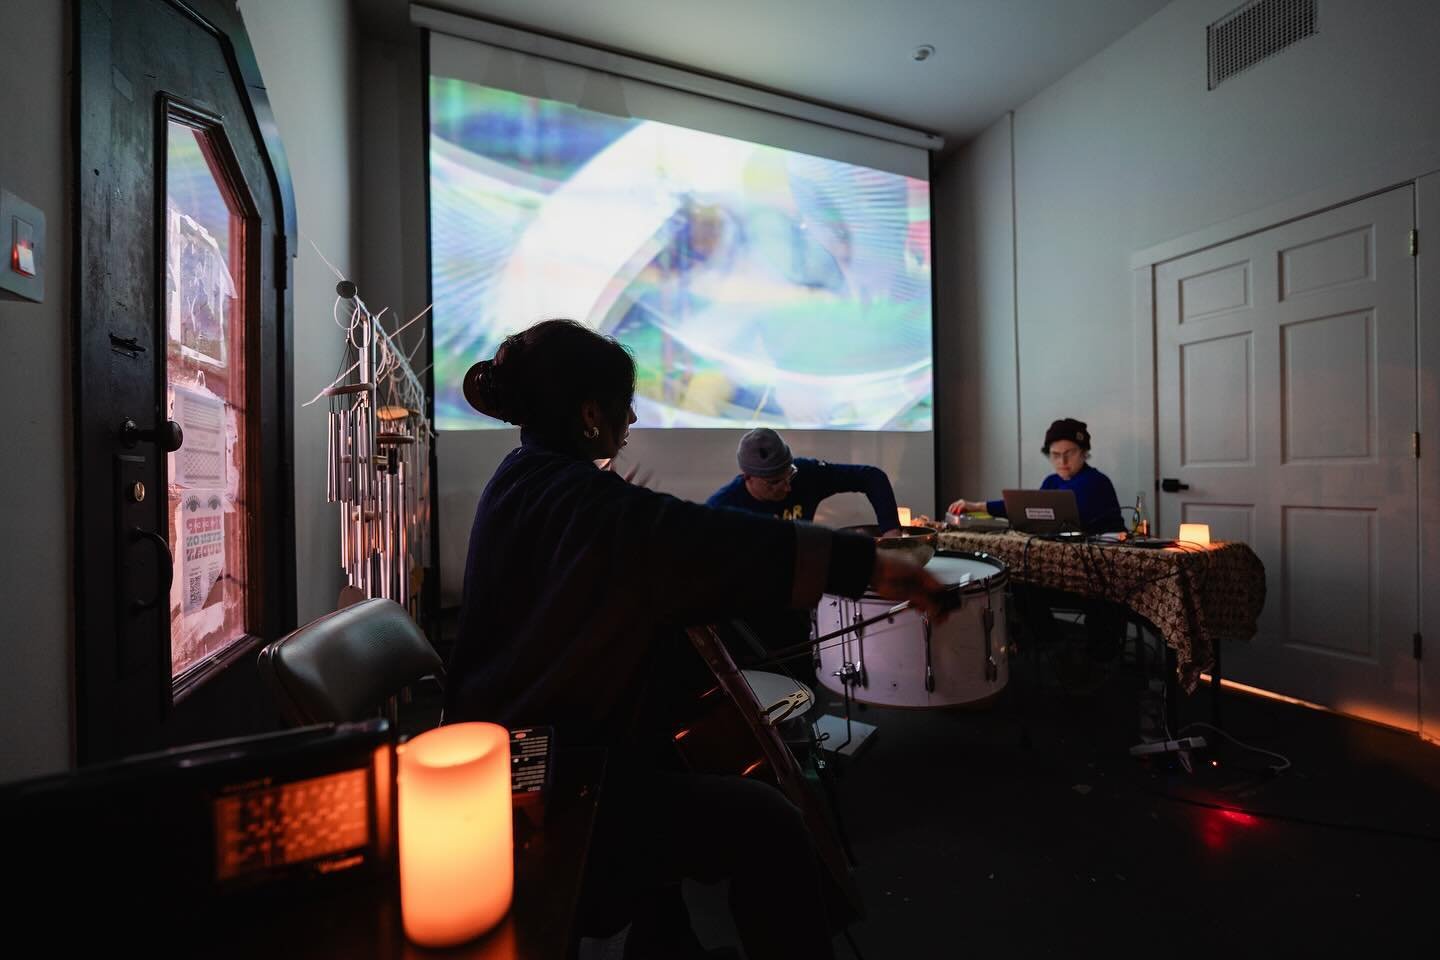 Moments from &ldquo;Comfort Music +&rdquo; at @comfort_station on 4/4/24 featuring Kim Alpert (video/voice), Lia Kohl (cello), and Ben Hall (percussion). 📸 by Ricardo E. Adame